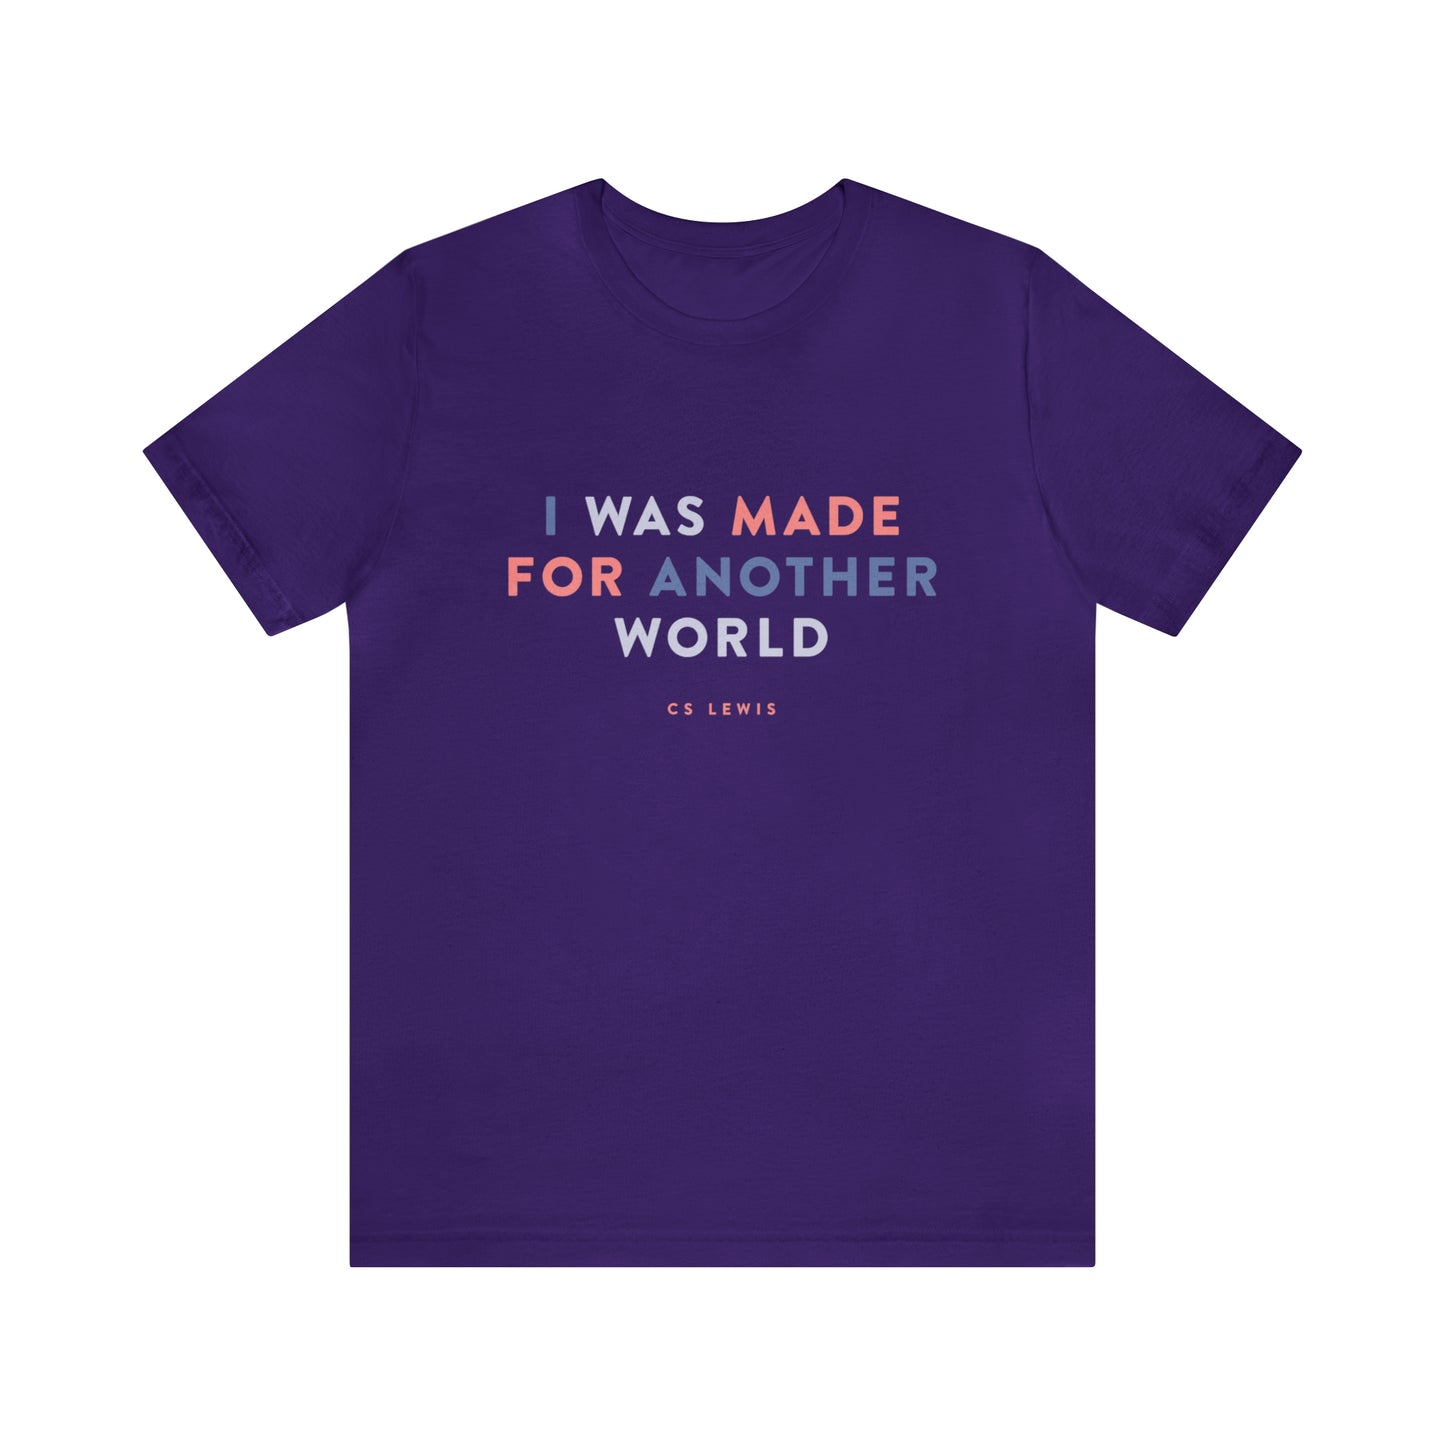 I was made for another world T-shirt